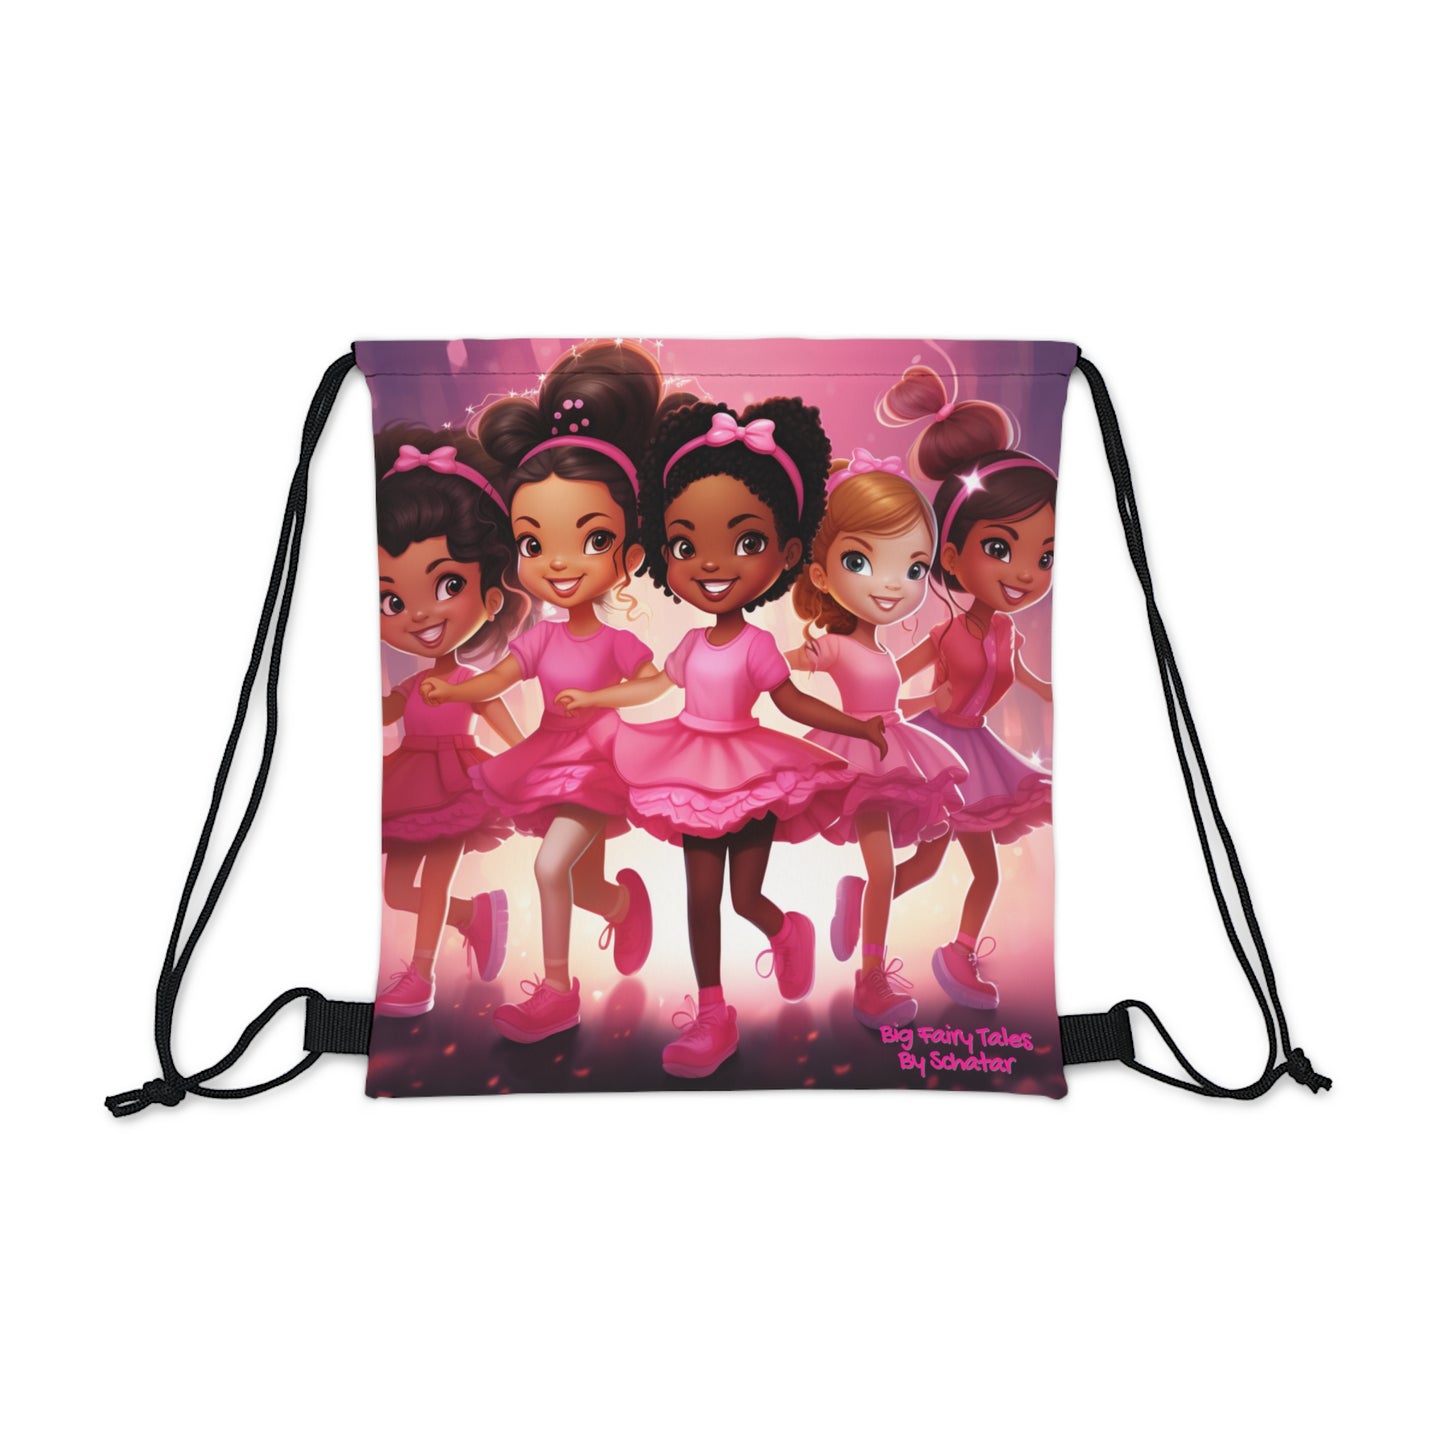 Enchanted Dreams Dance Bag From Big Fairy Tales By Schatar